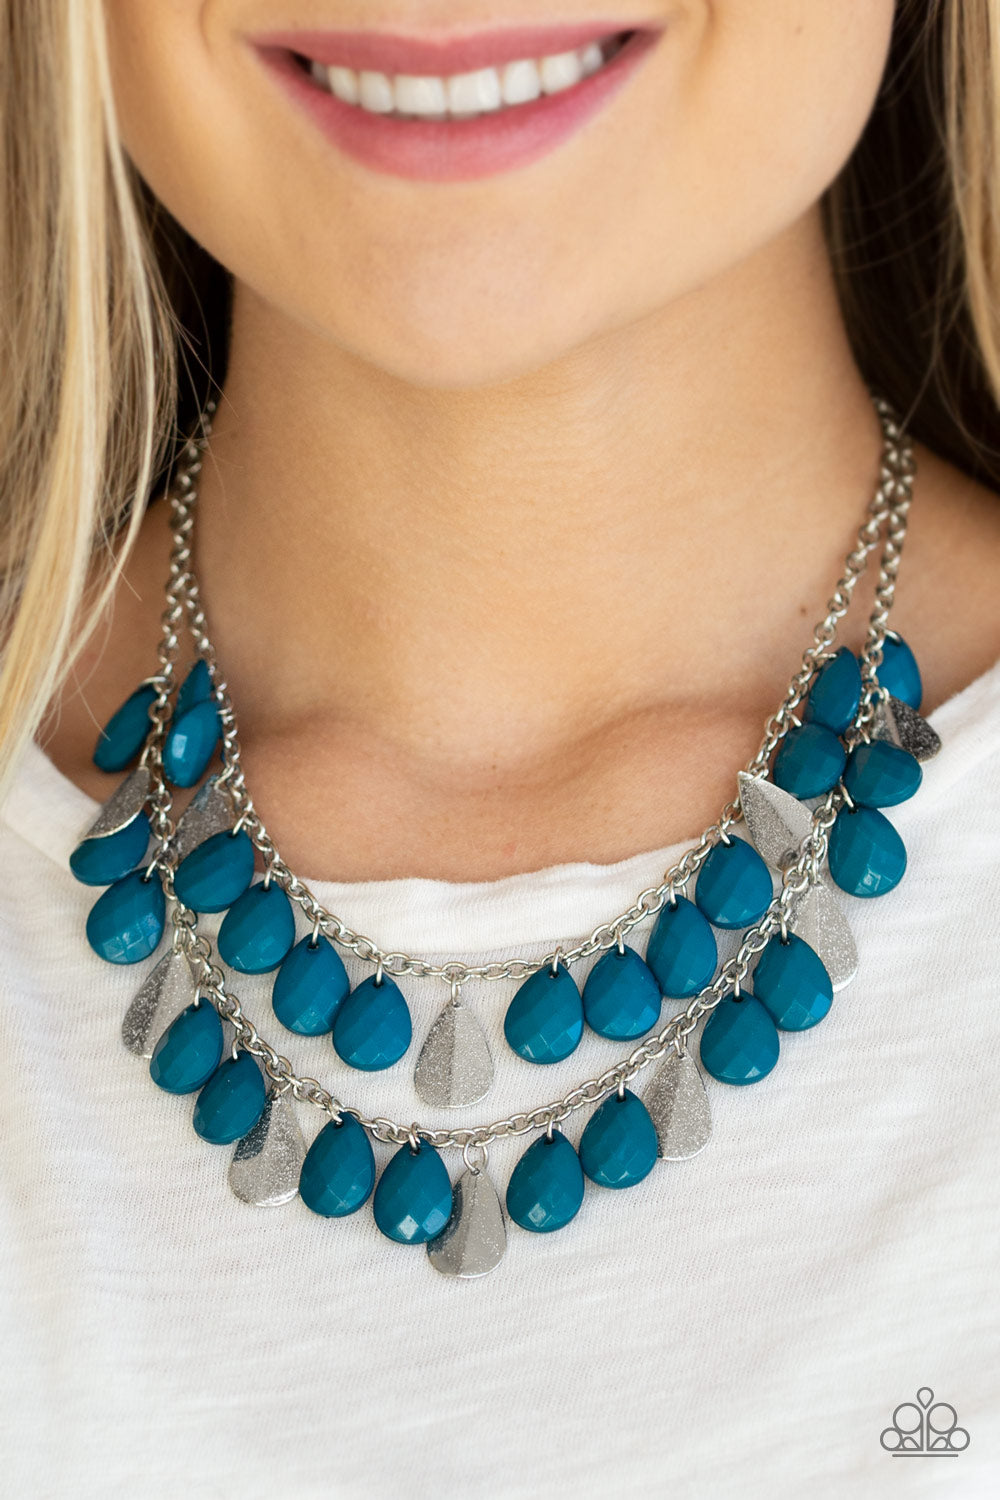 Life of the FIESTA Blue Necklace Paparazzi Accessories